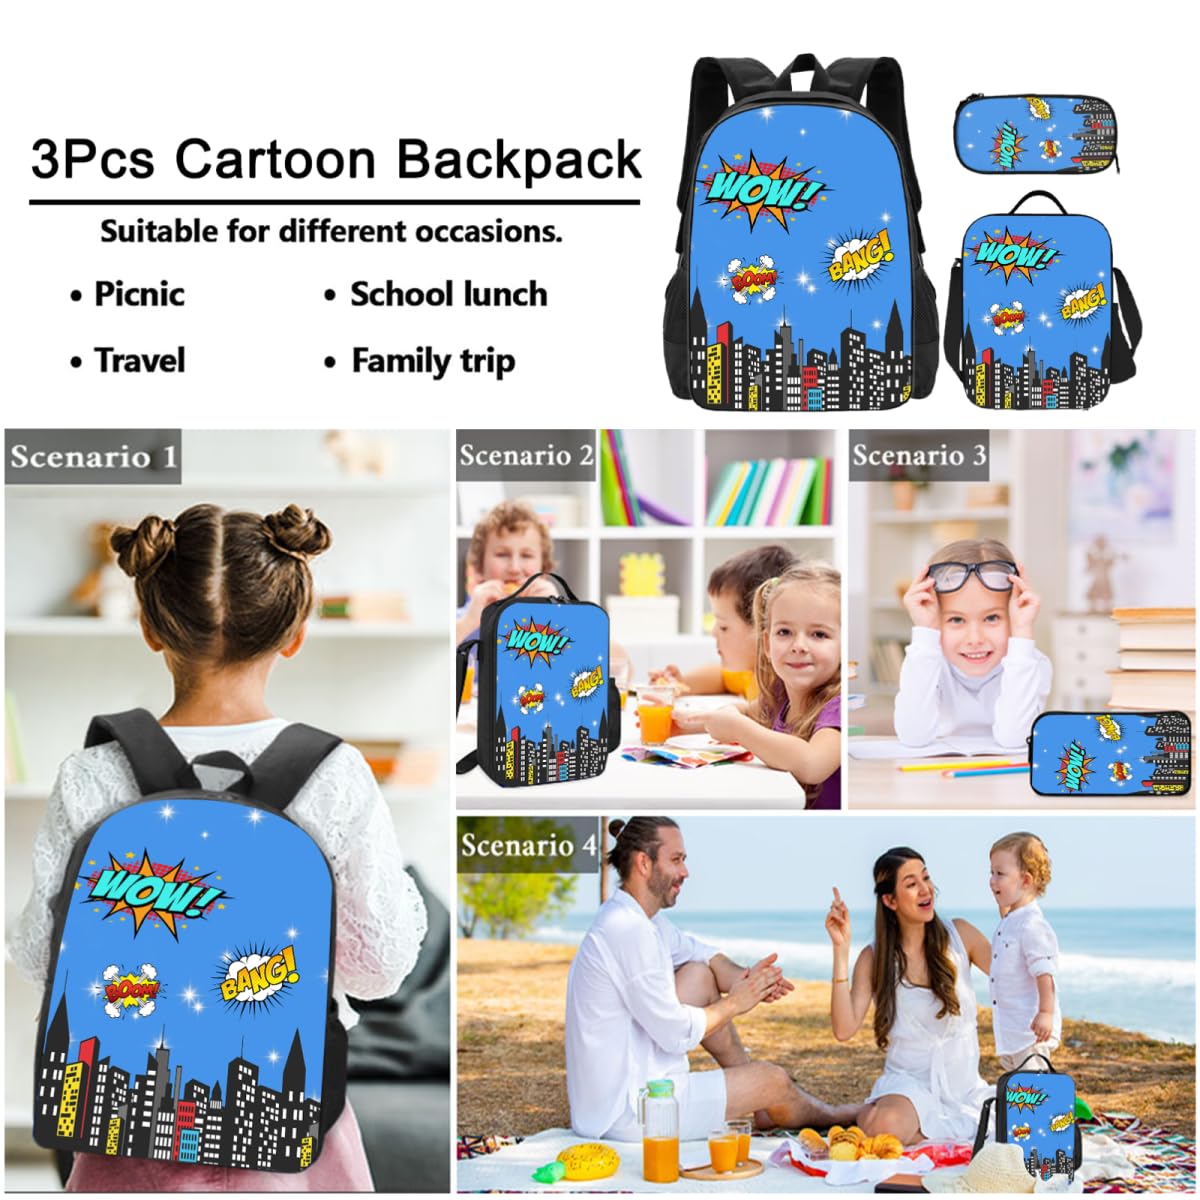 Kids 3Pcs Cartoon Backpack Set, 3-in-1 Large Capacity School Bookbag Travel Daypack Bag with Lunch Bag and Pencil Case -1